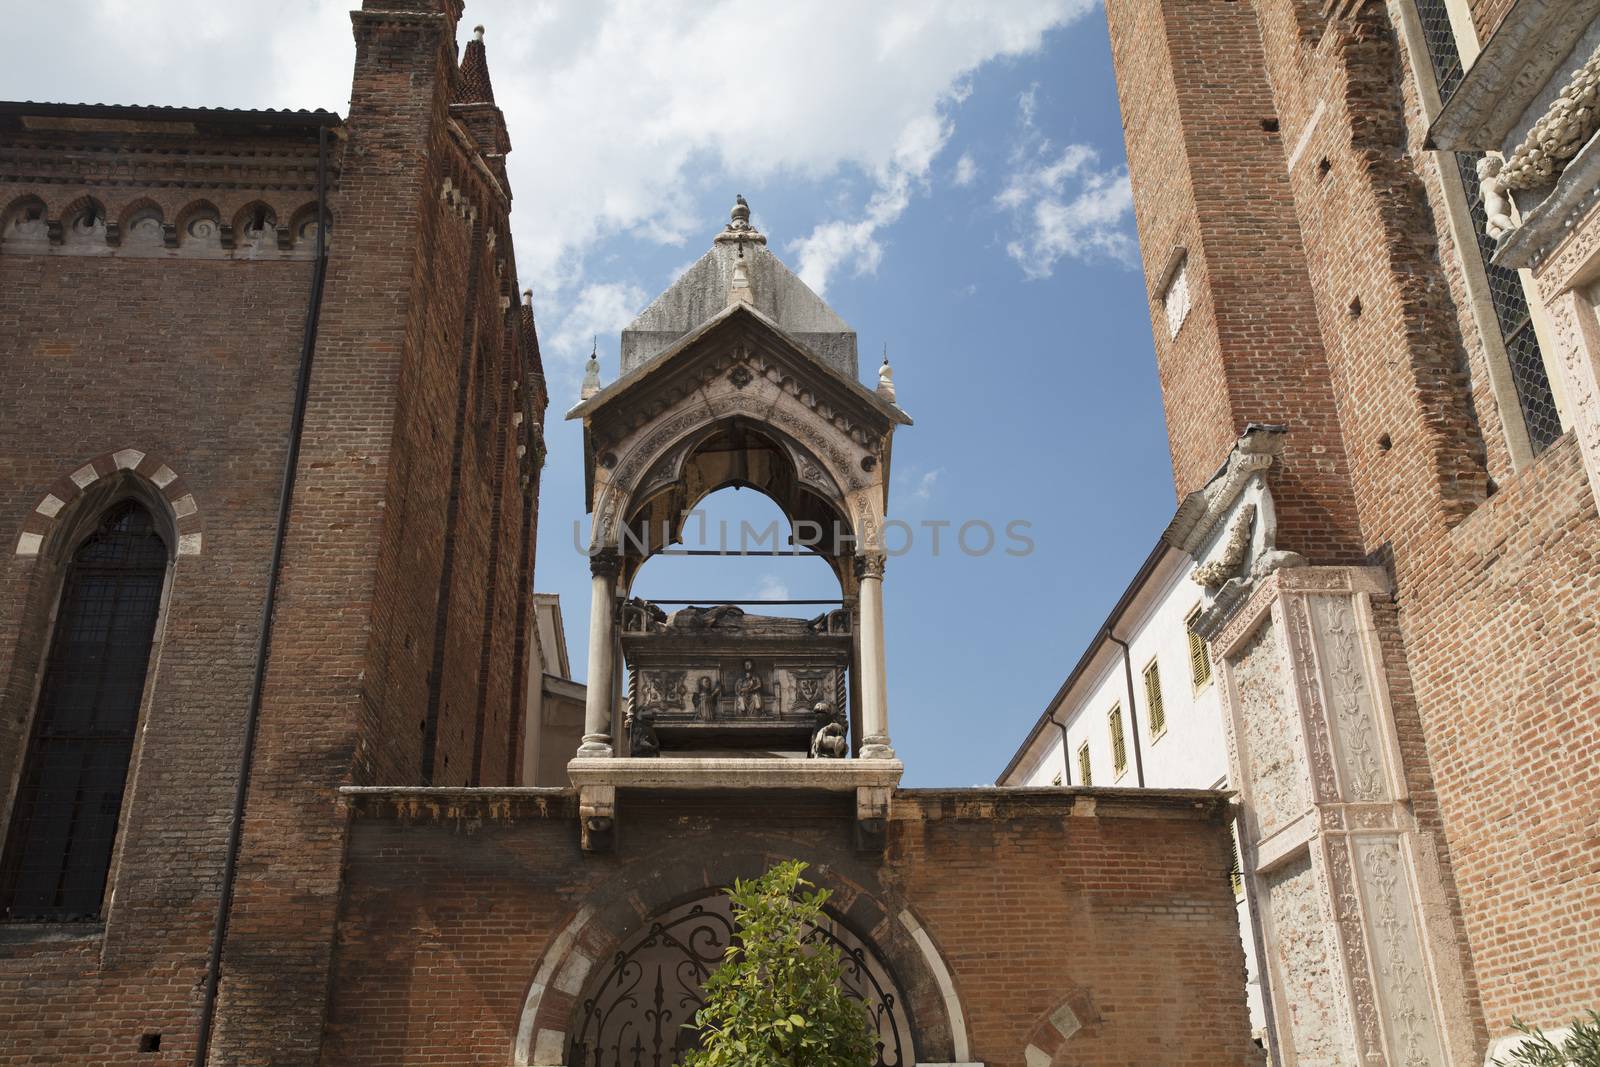 Verona, Italy, Europe, August 2019, A view of Chiesa di Santa An by ElectricEggPhoto